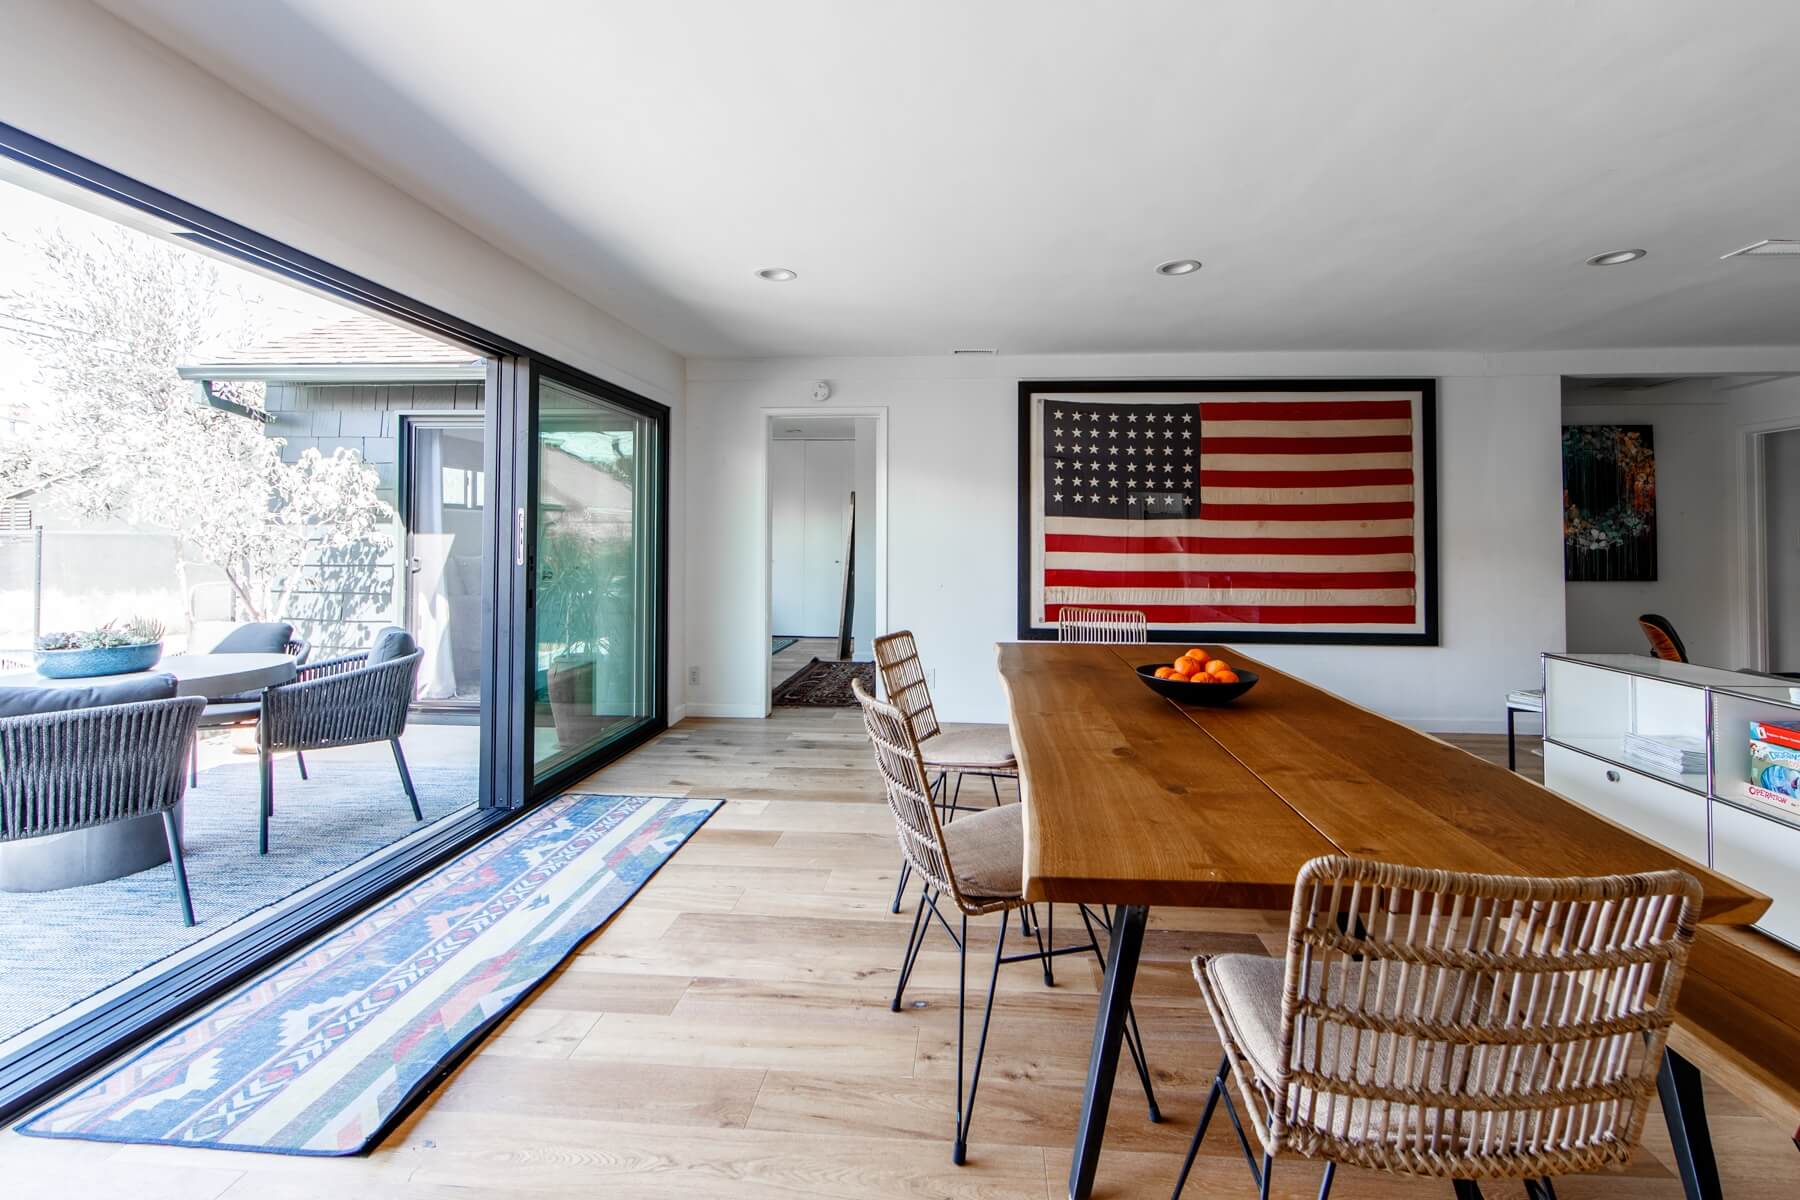 outdoor patio behind glass doors, inside wooden table with oranges in a bowl and American flag artwork